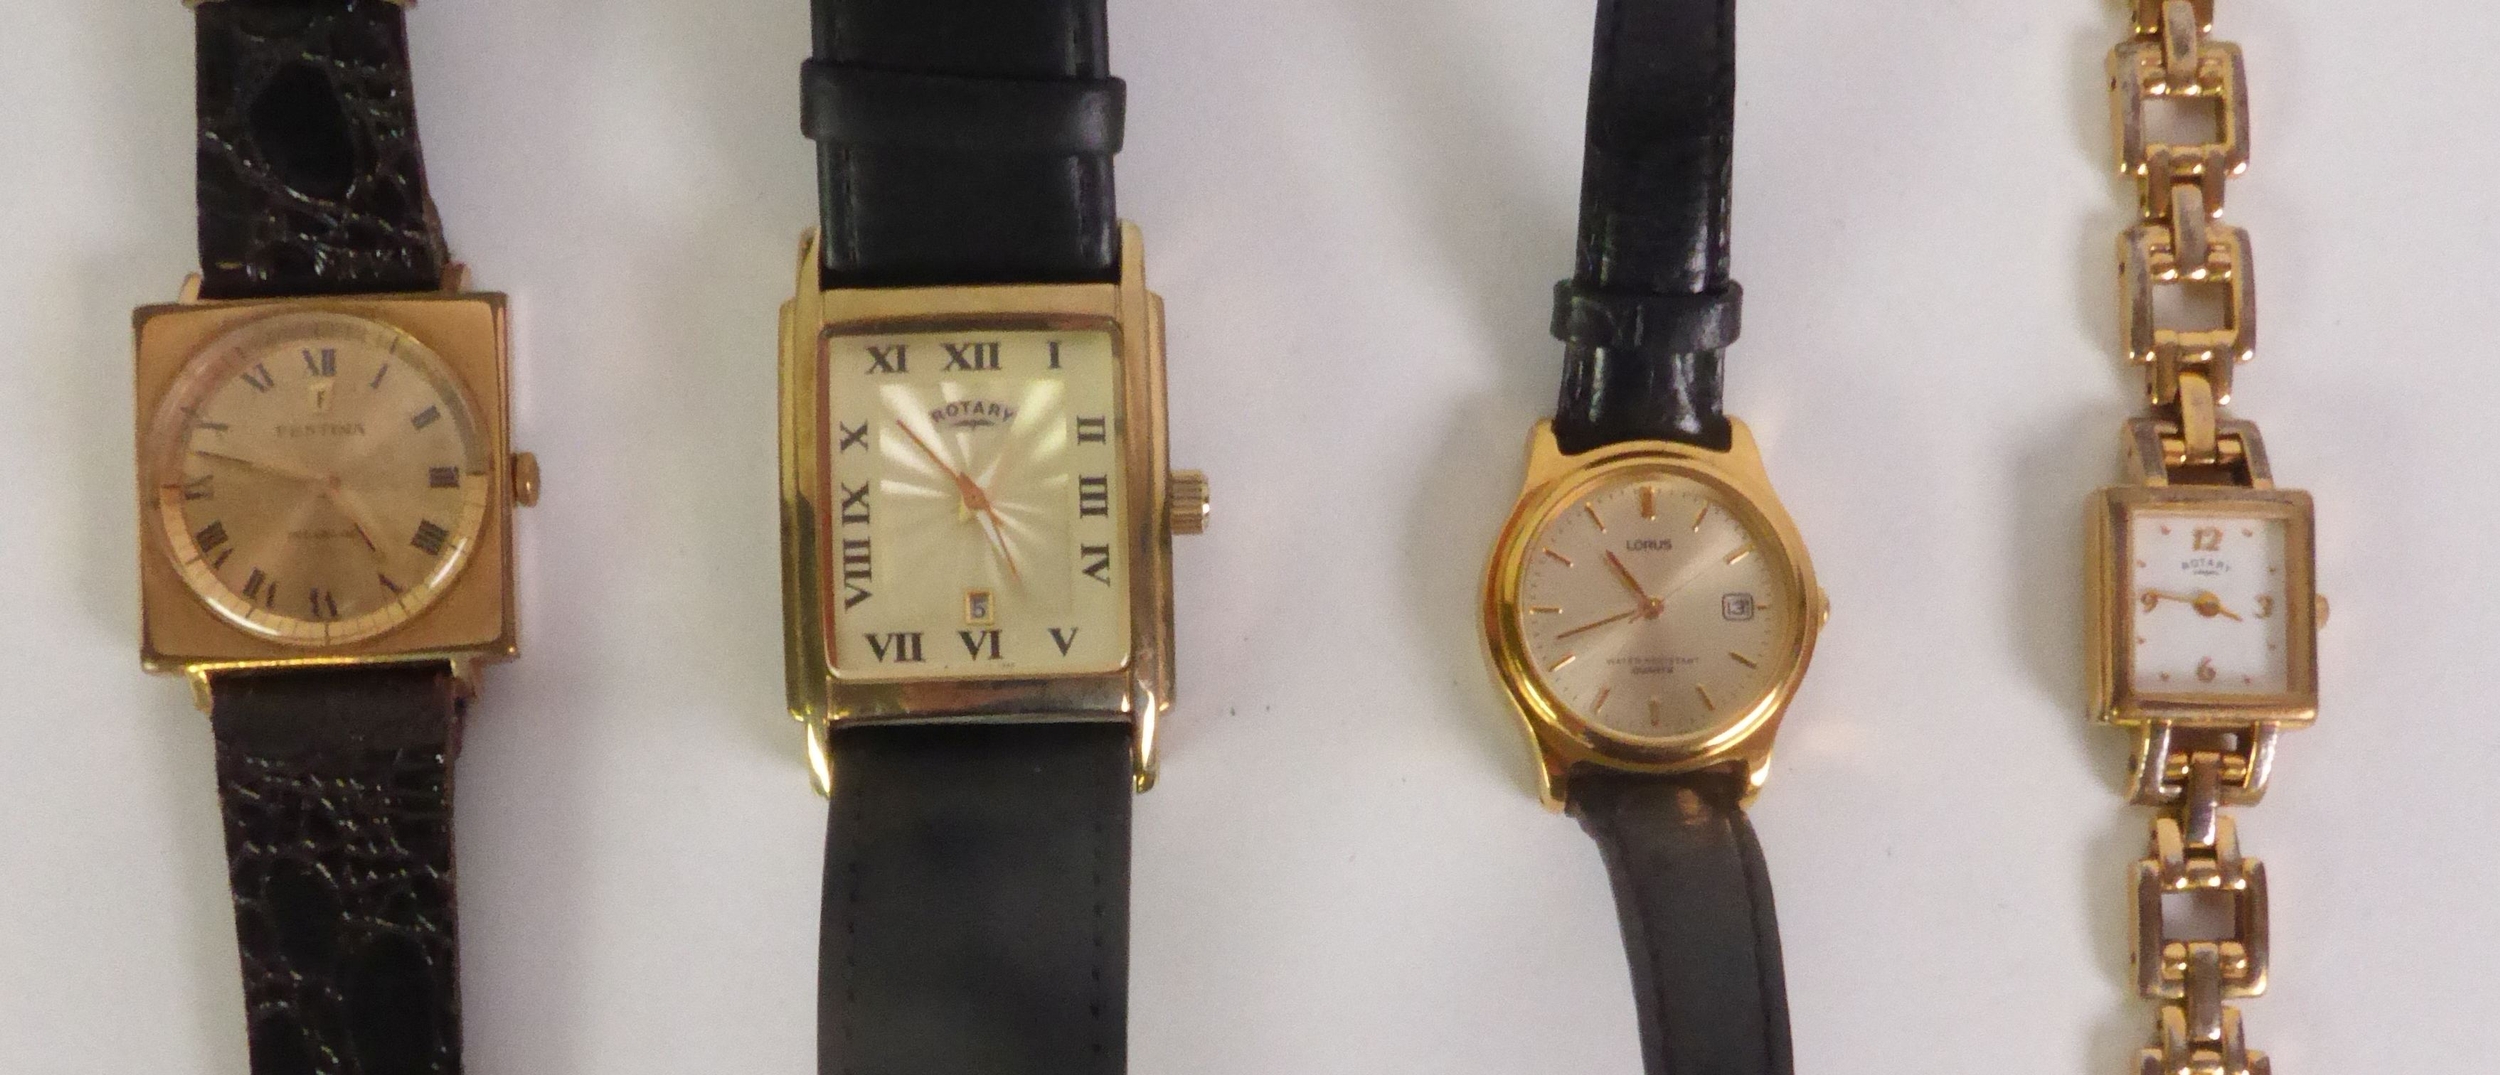 GENTS ROTARY QUARTZ GOLD PLATED WRIST WATCH, with oblong Roman dial, centre seconds and date - Image 2 of 2